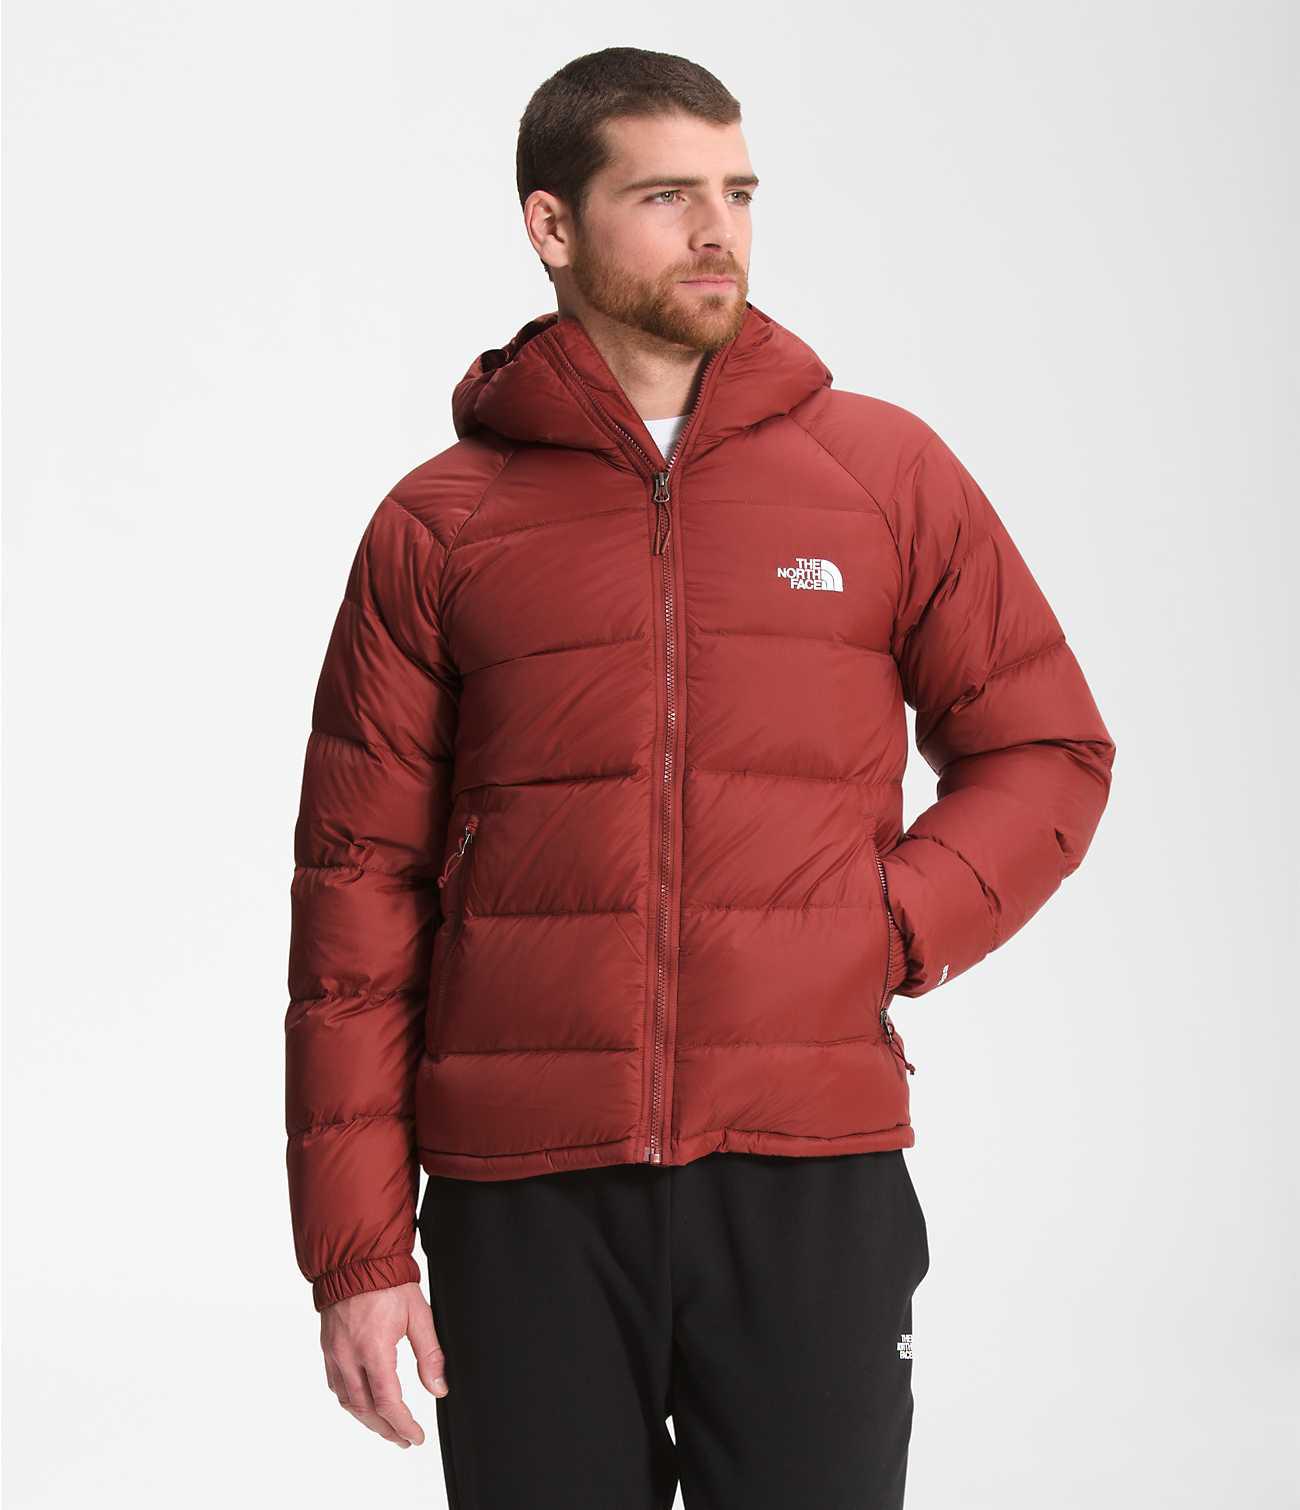 Men’s Hydrenalite Down Hoodie by THE NORTH FACE | jellibeans